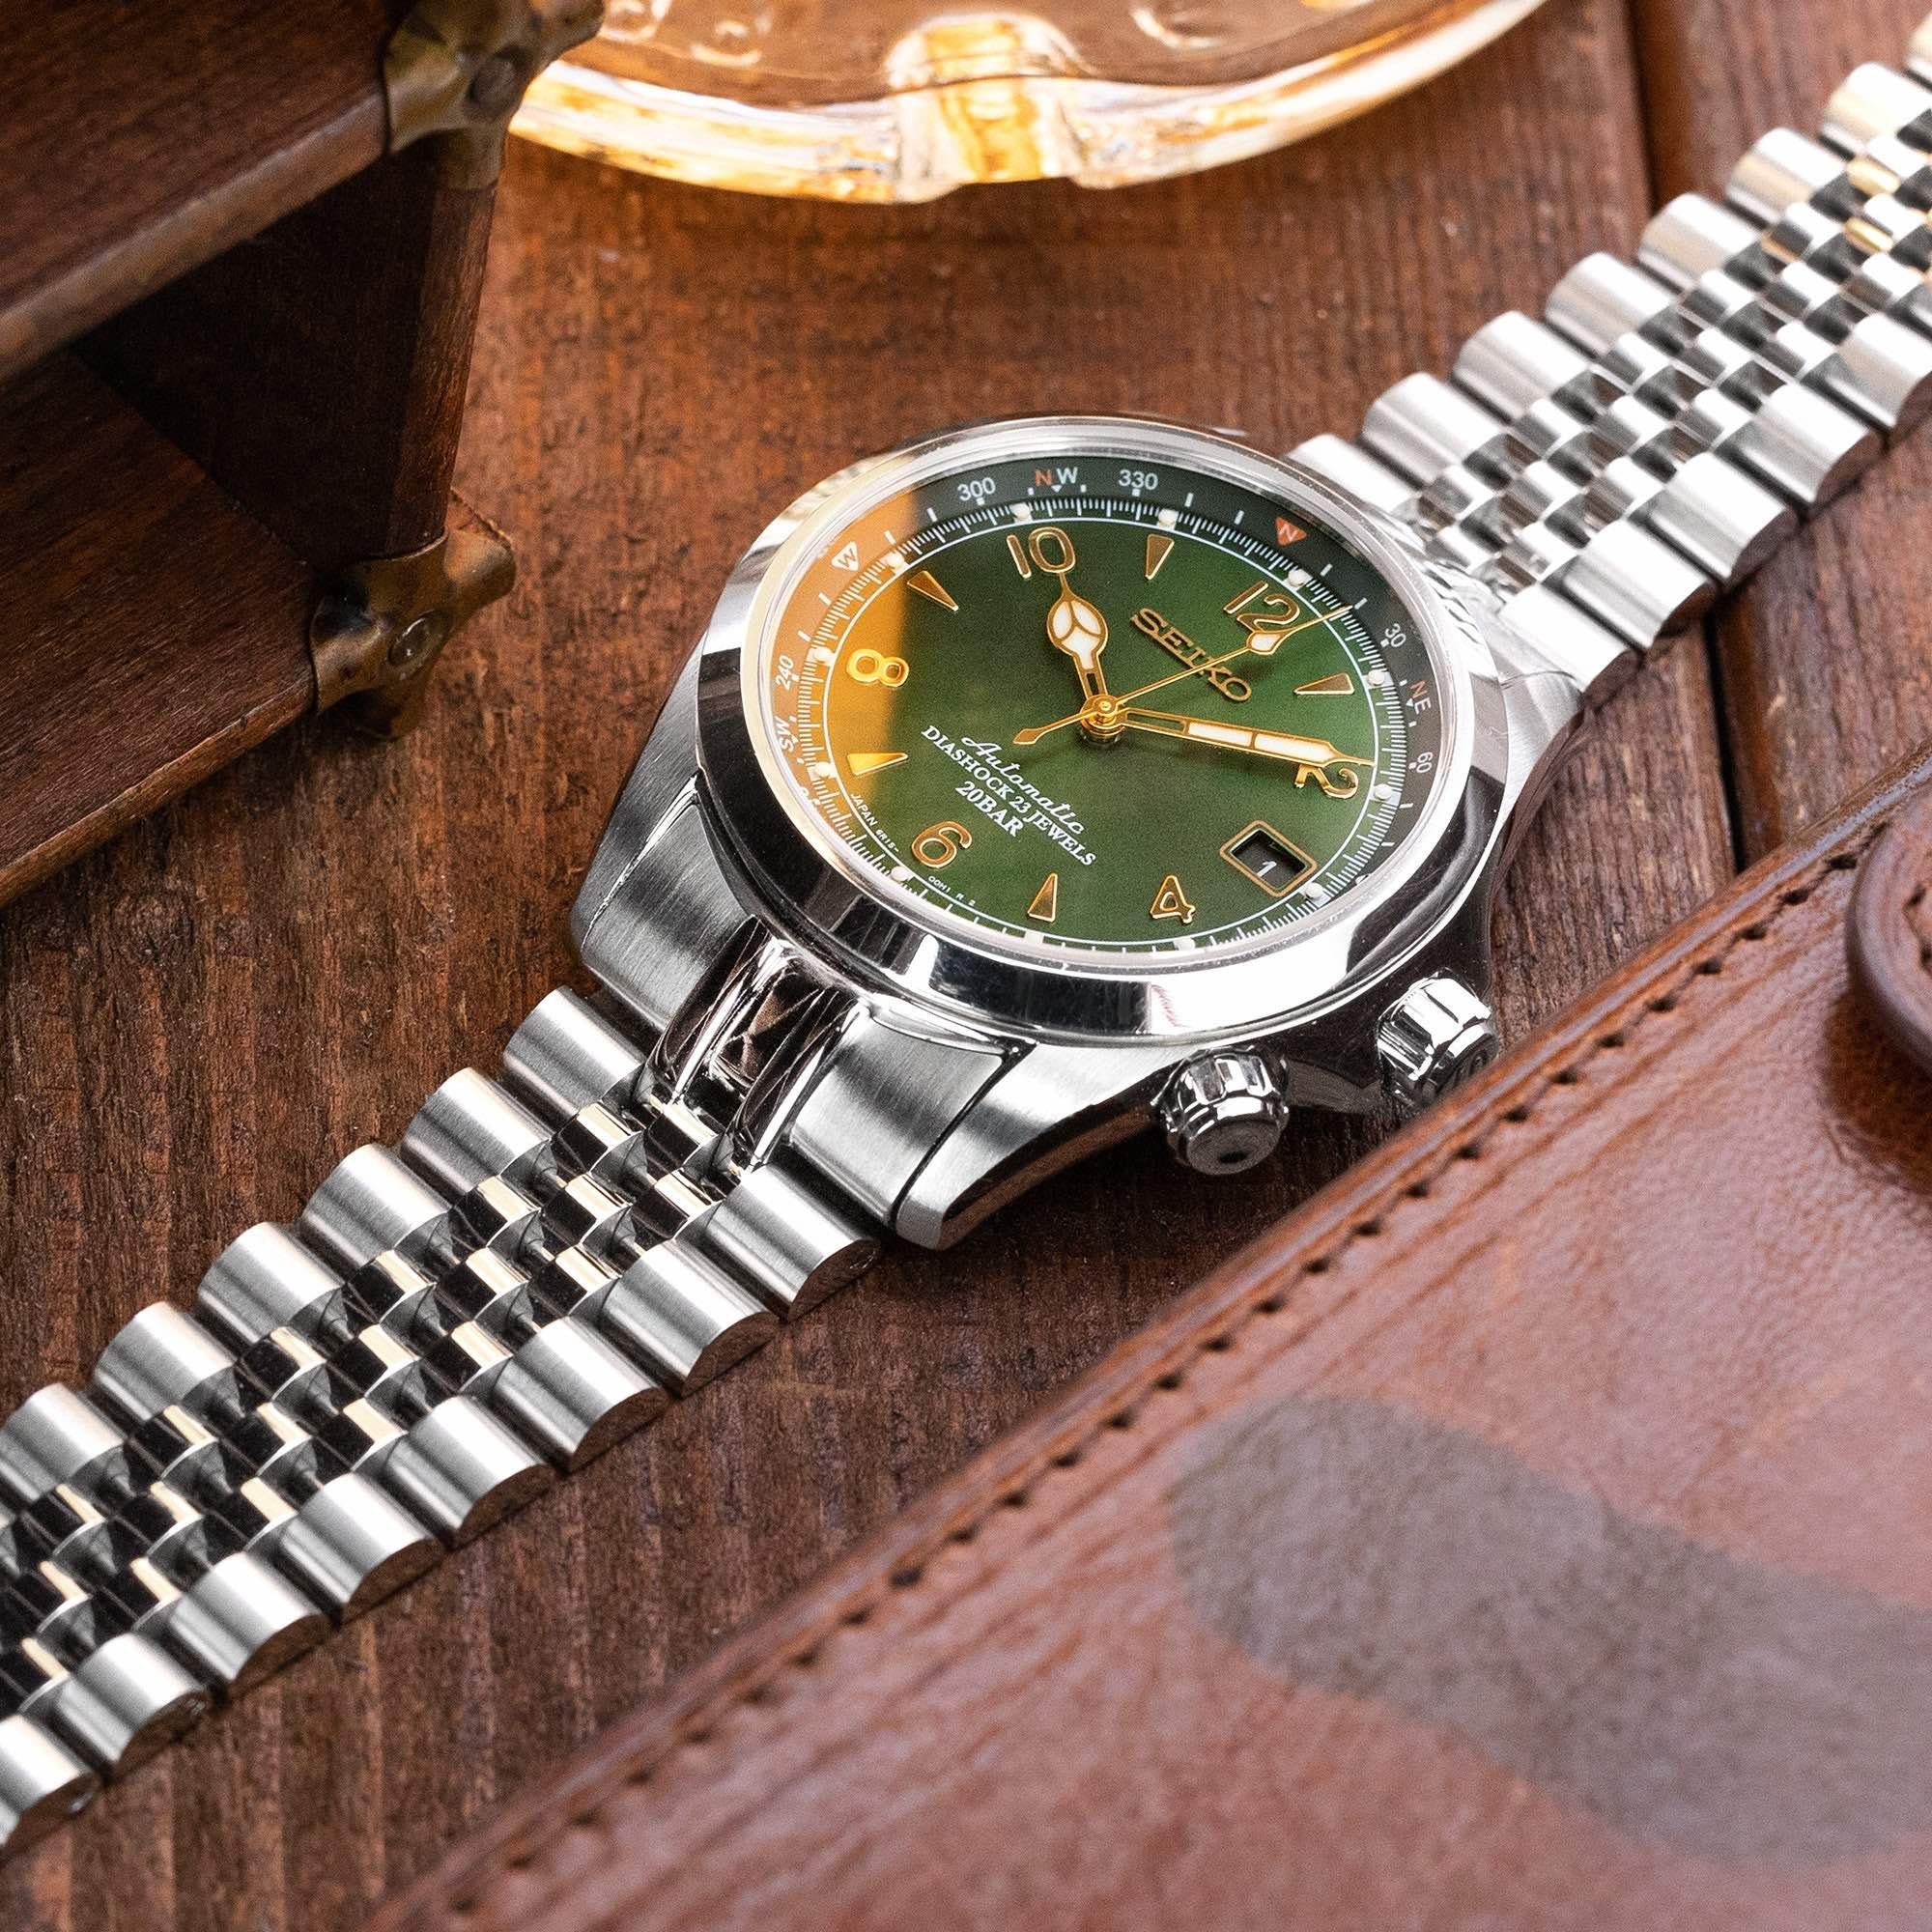 Seiko Alpinist SARB017 Review - The Truth About Watches